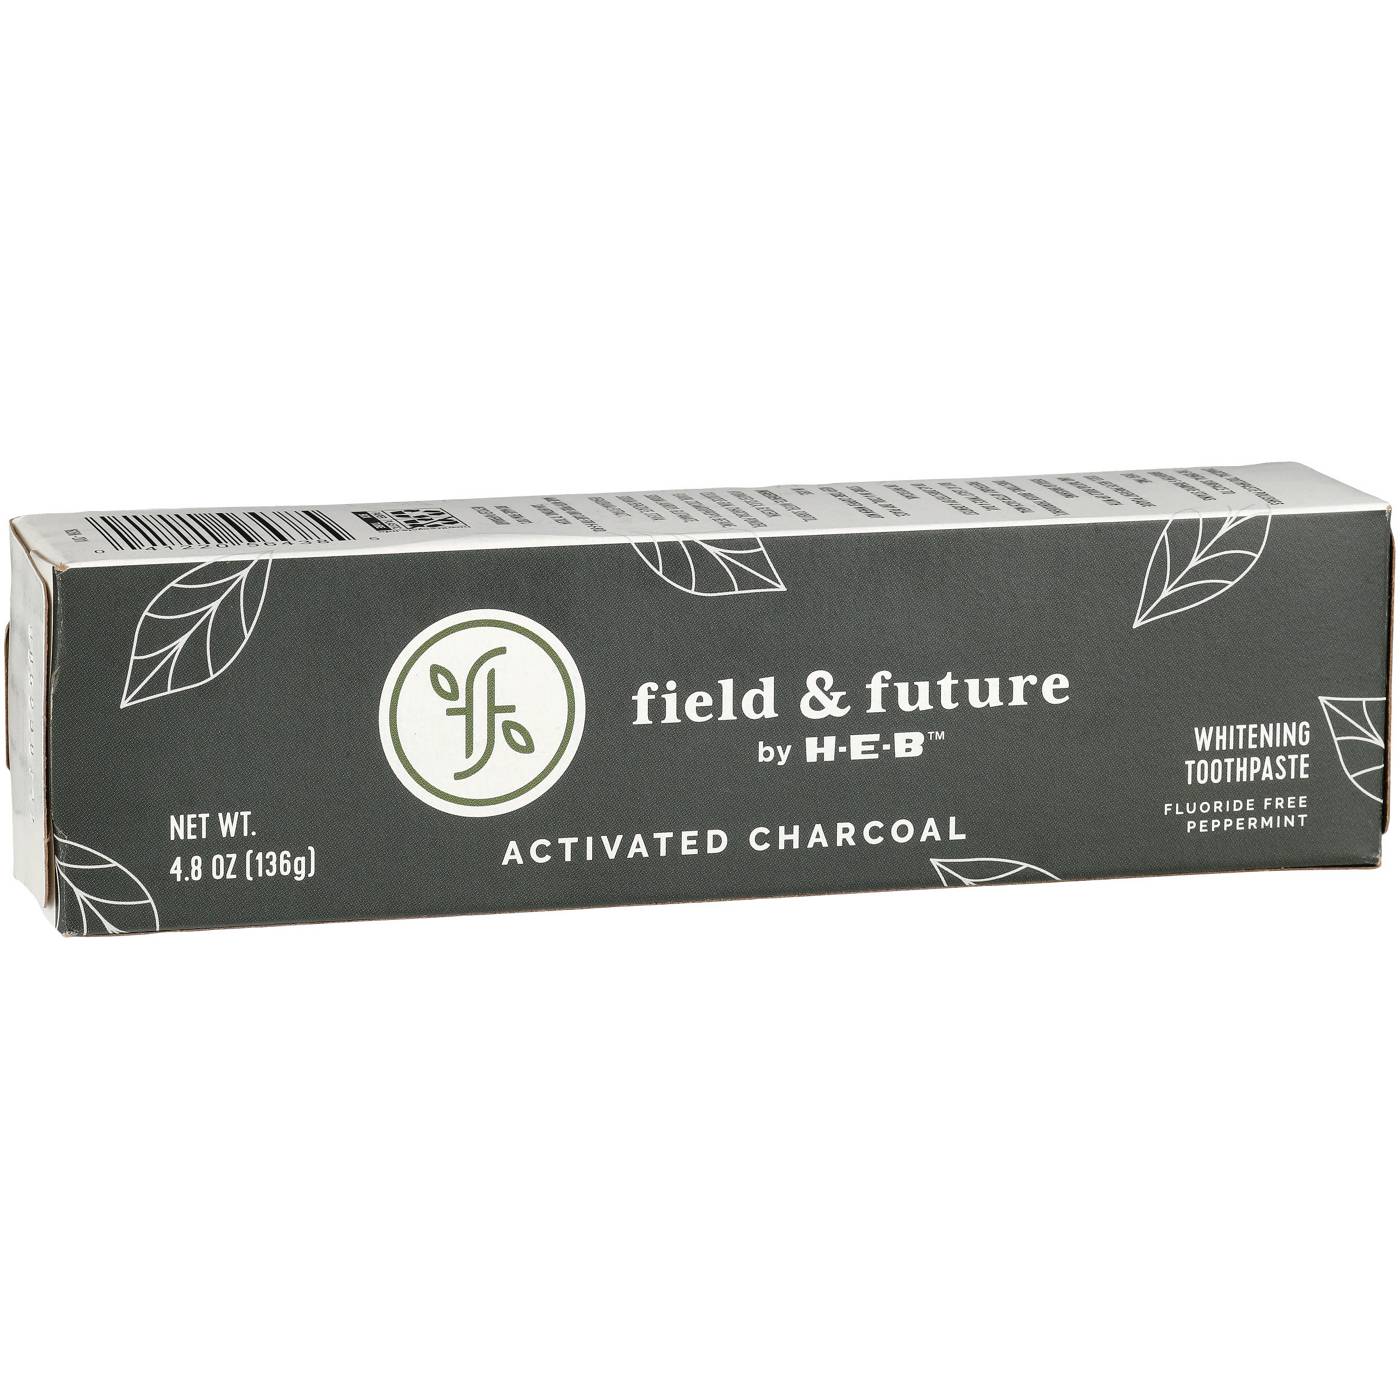 Field & Future by H-E-B Activated Charcoal Fluoride-Free Whitening Toothpaste - Peppermint; image 6 of 6